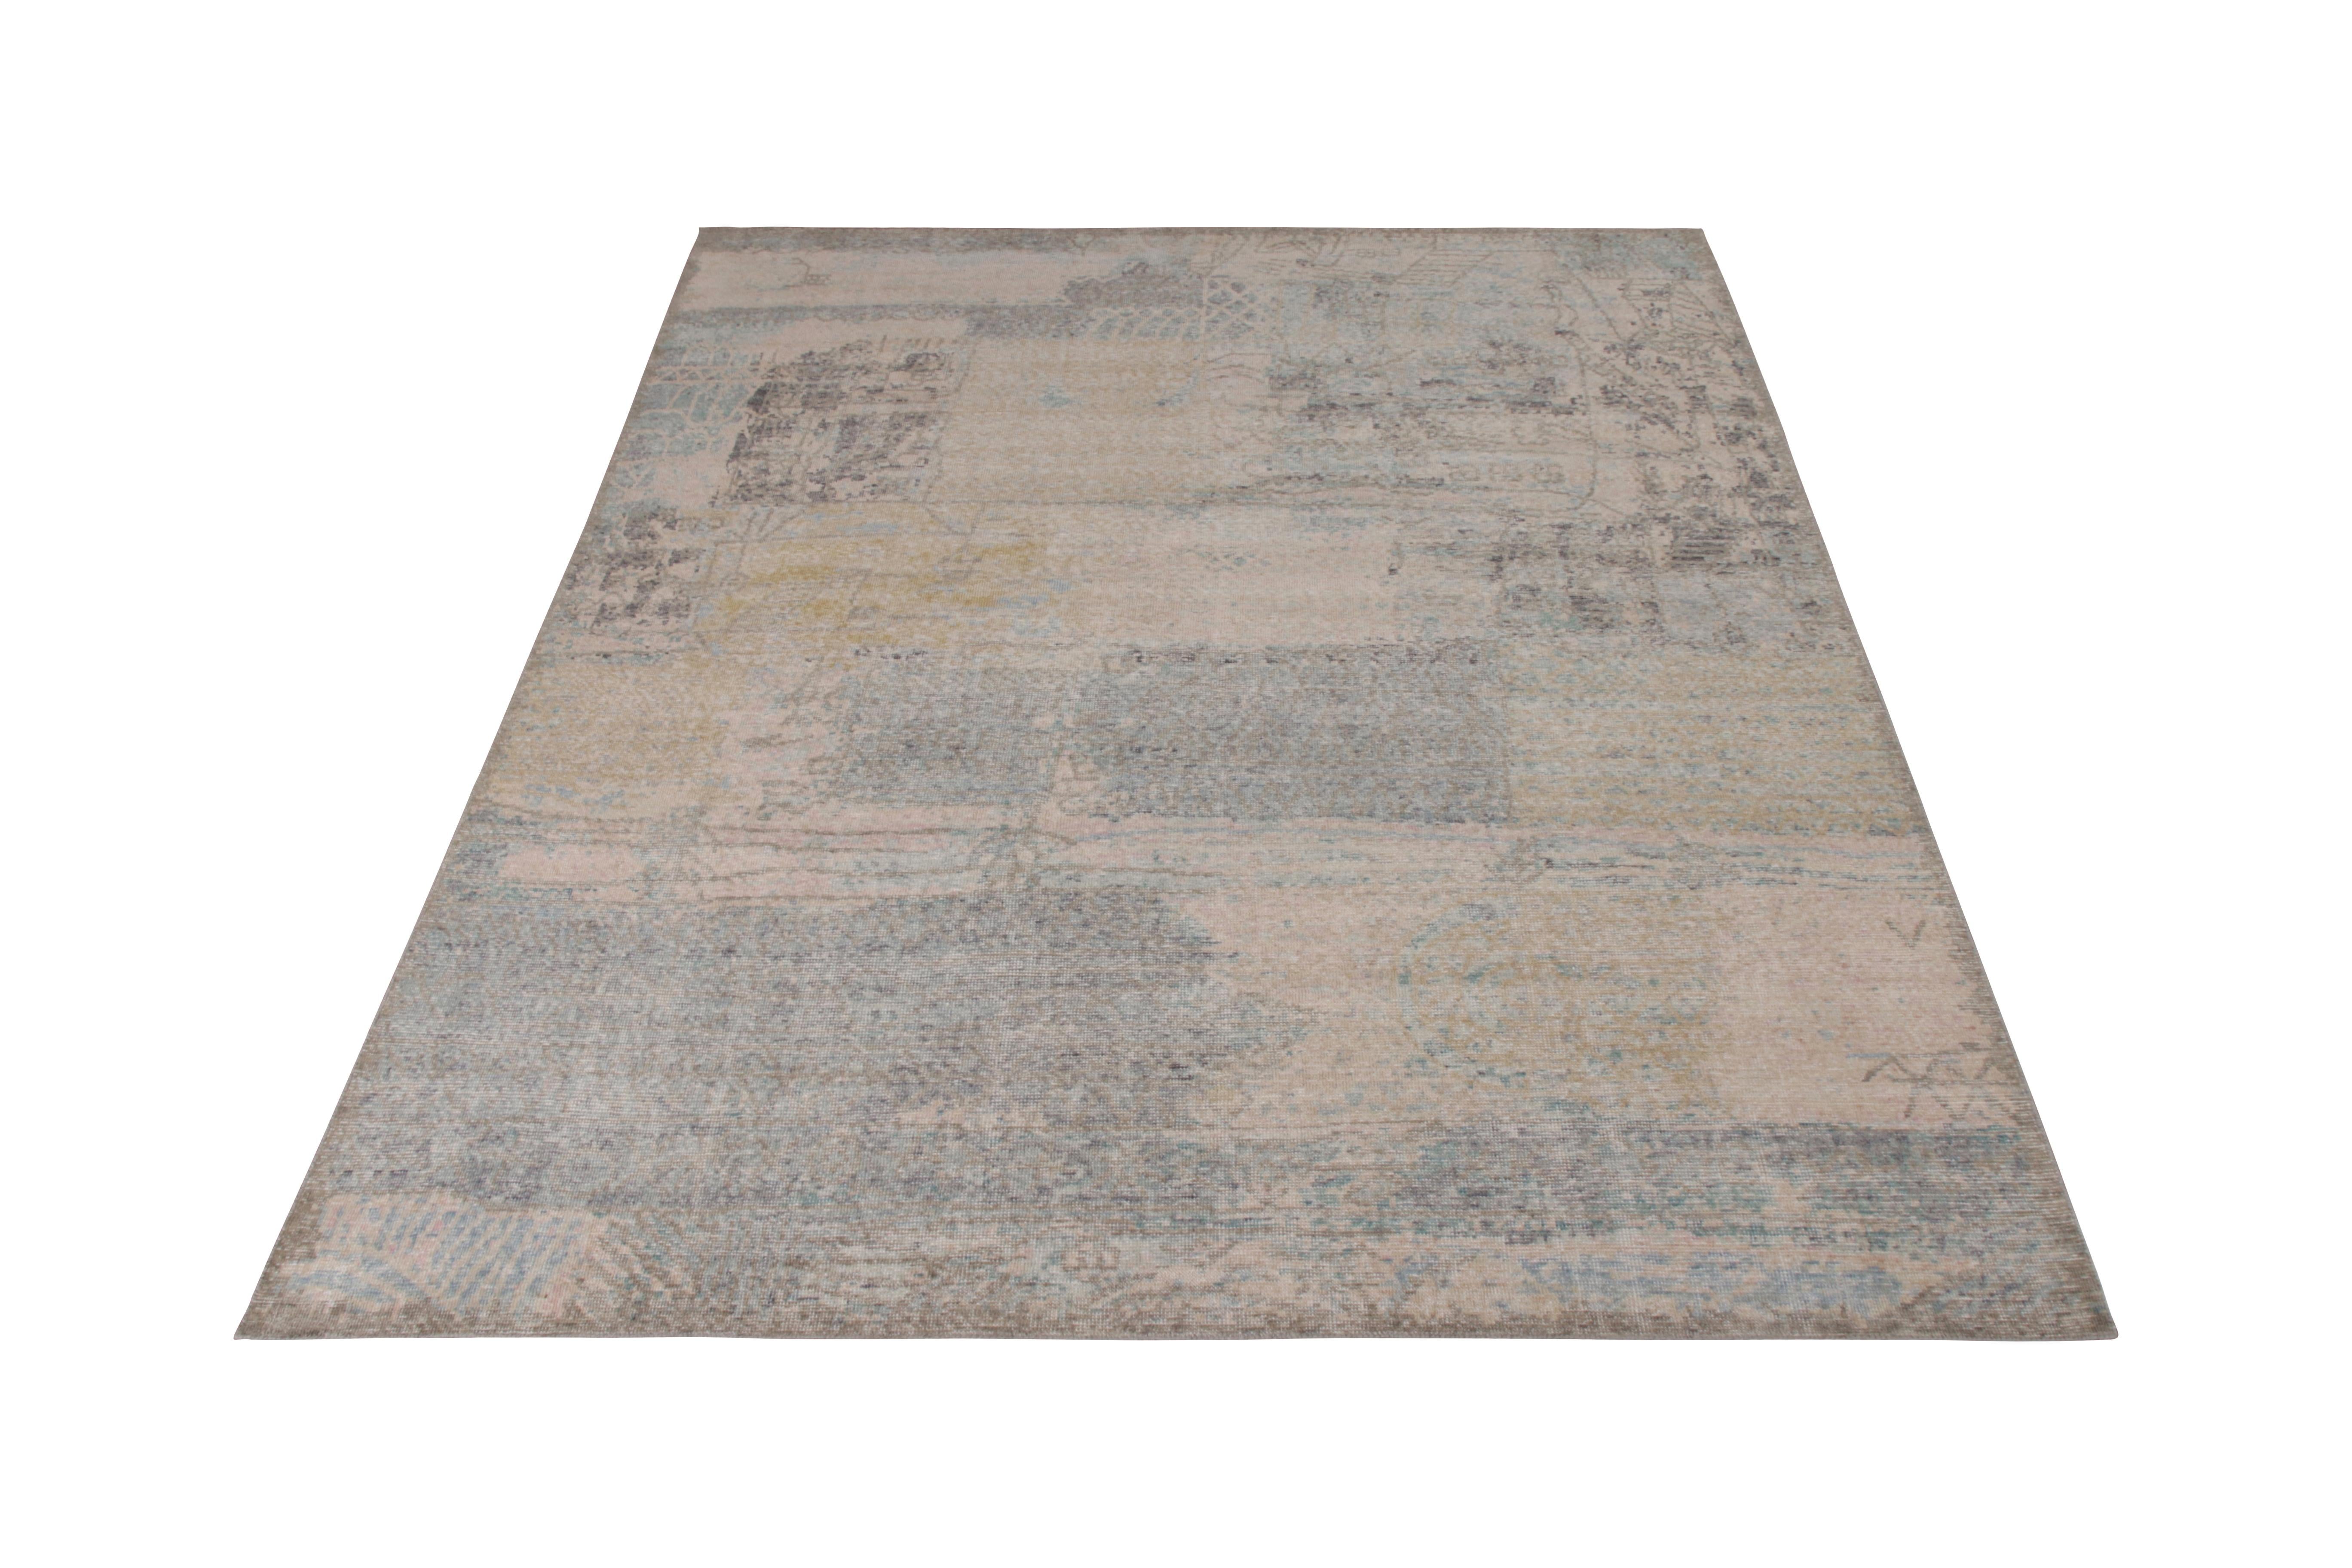 Handmade in a refined, low-pile wool with a comfortable wash achieving this shabby-chic distressed style, this 8 x 10 abstract rug joins the Homage Collection by Rug & Kilim, representing an encyclopedic approach to reimagining classic and modern